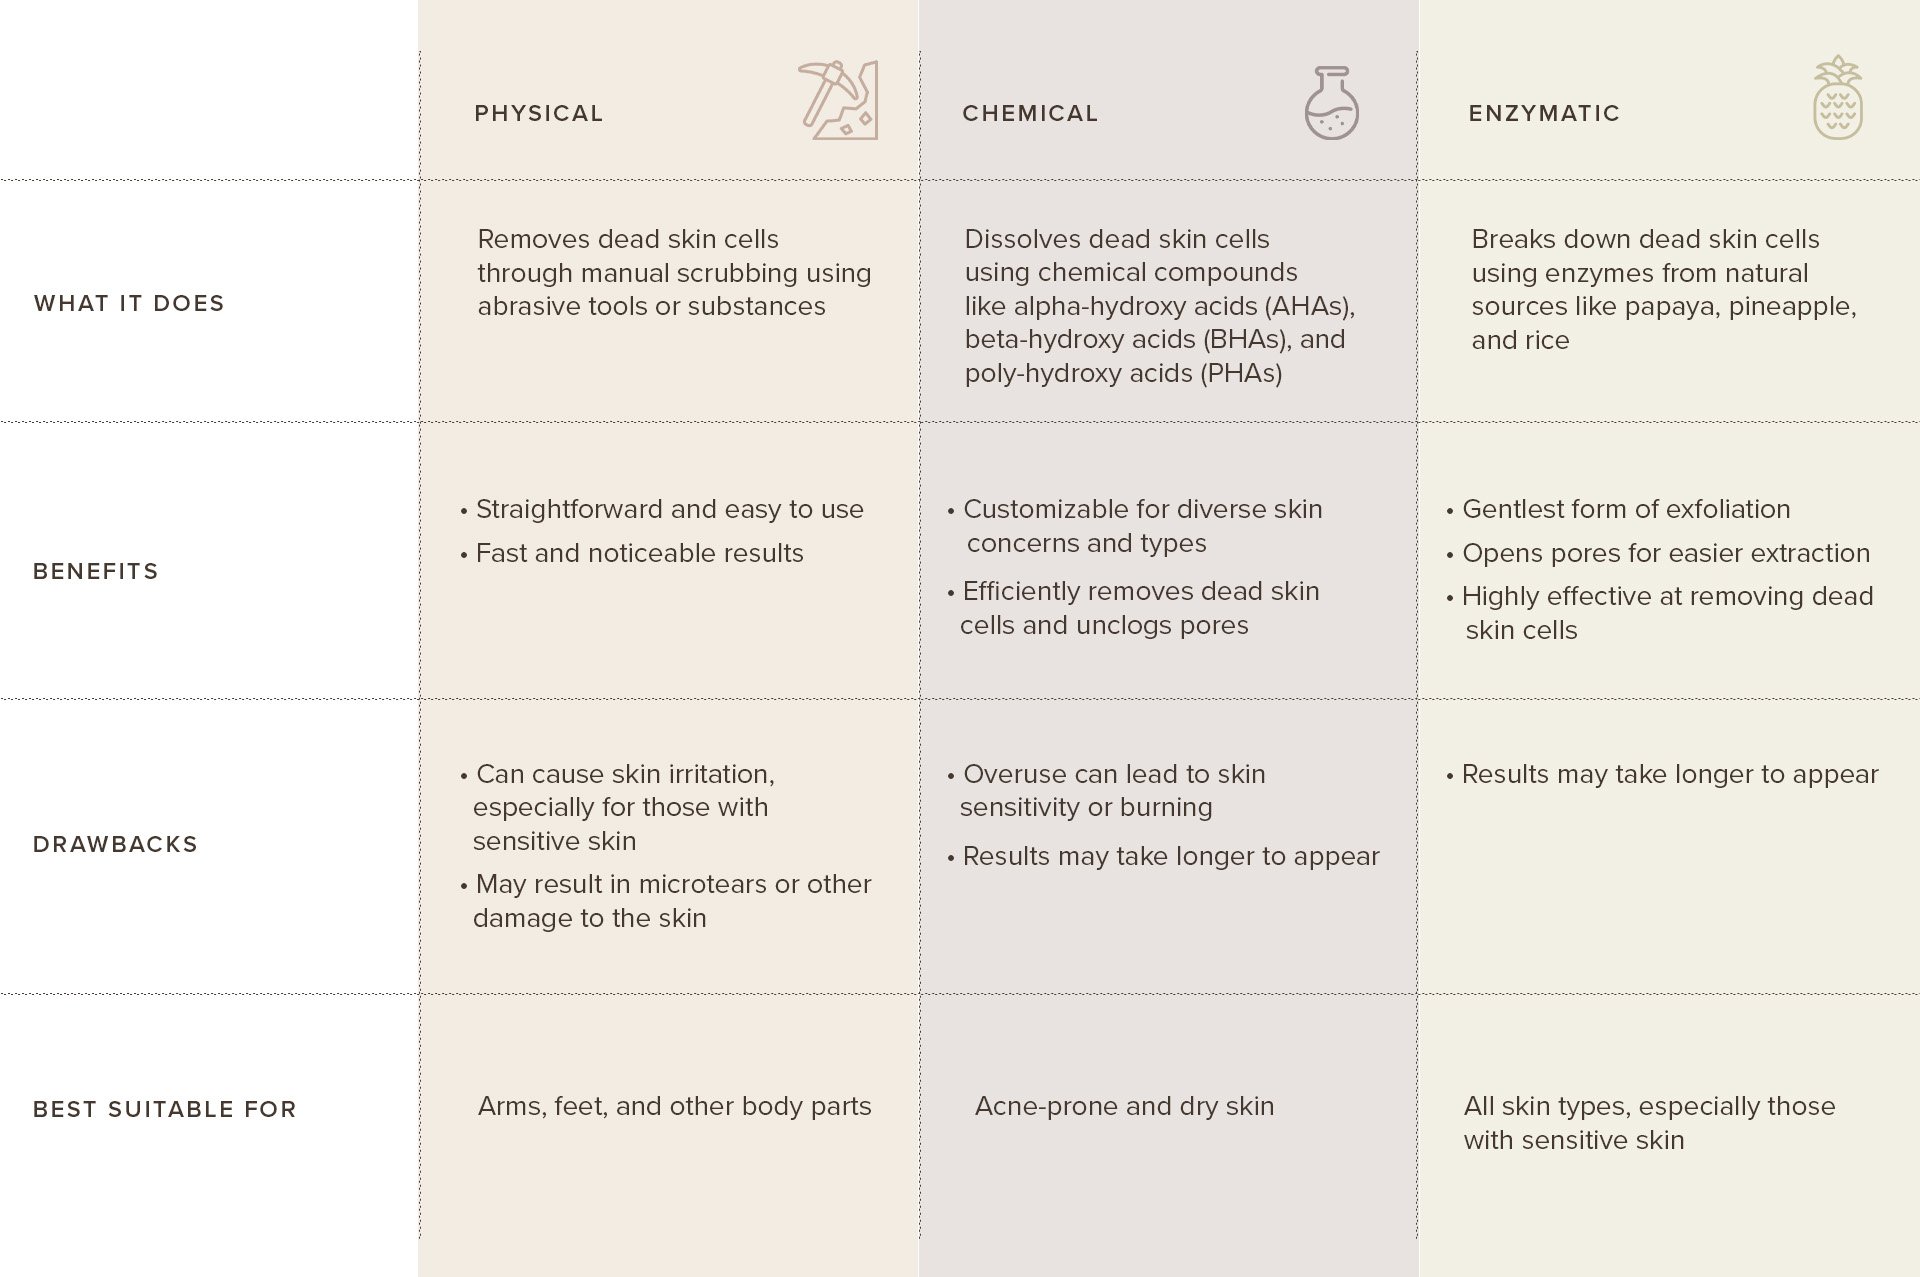 Chart comparing the 3 methods of exfoliation, which are physical, chemical, and gentle enzyme exfoliation.